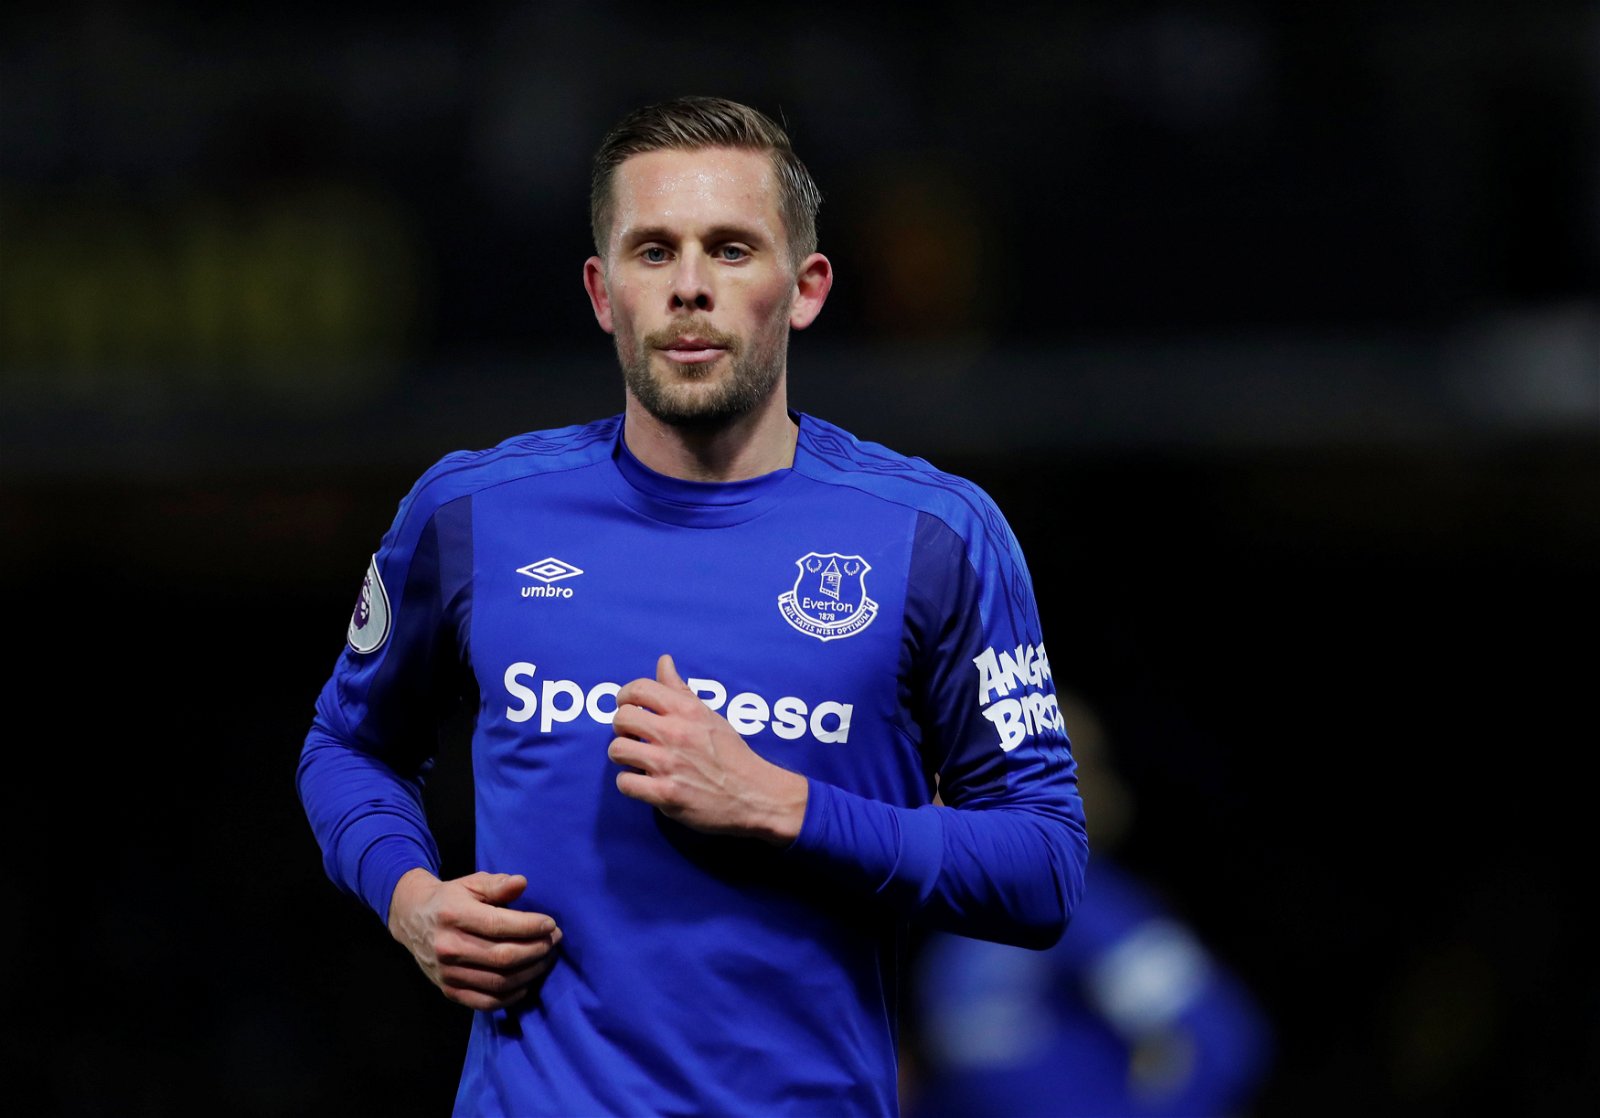 Top 10 most disappointing Premier League players this season Gylfi Sigurdsson 2018